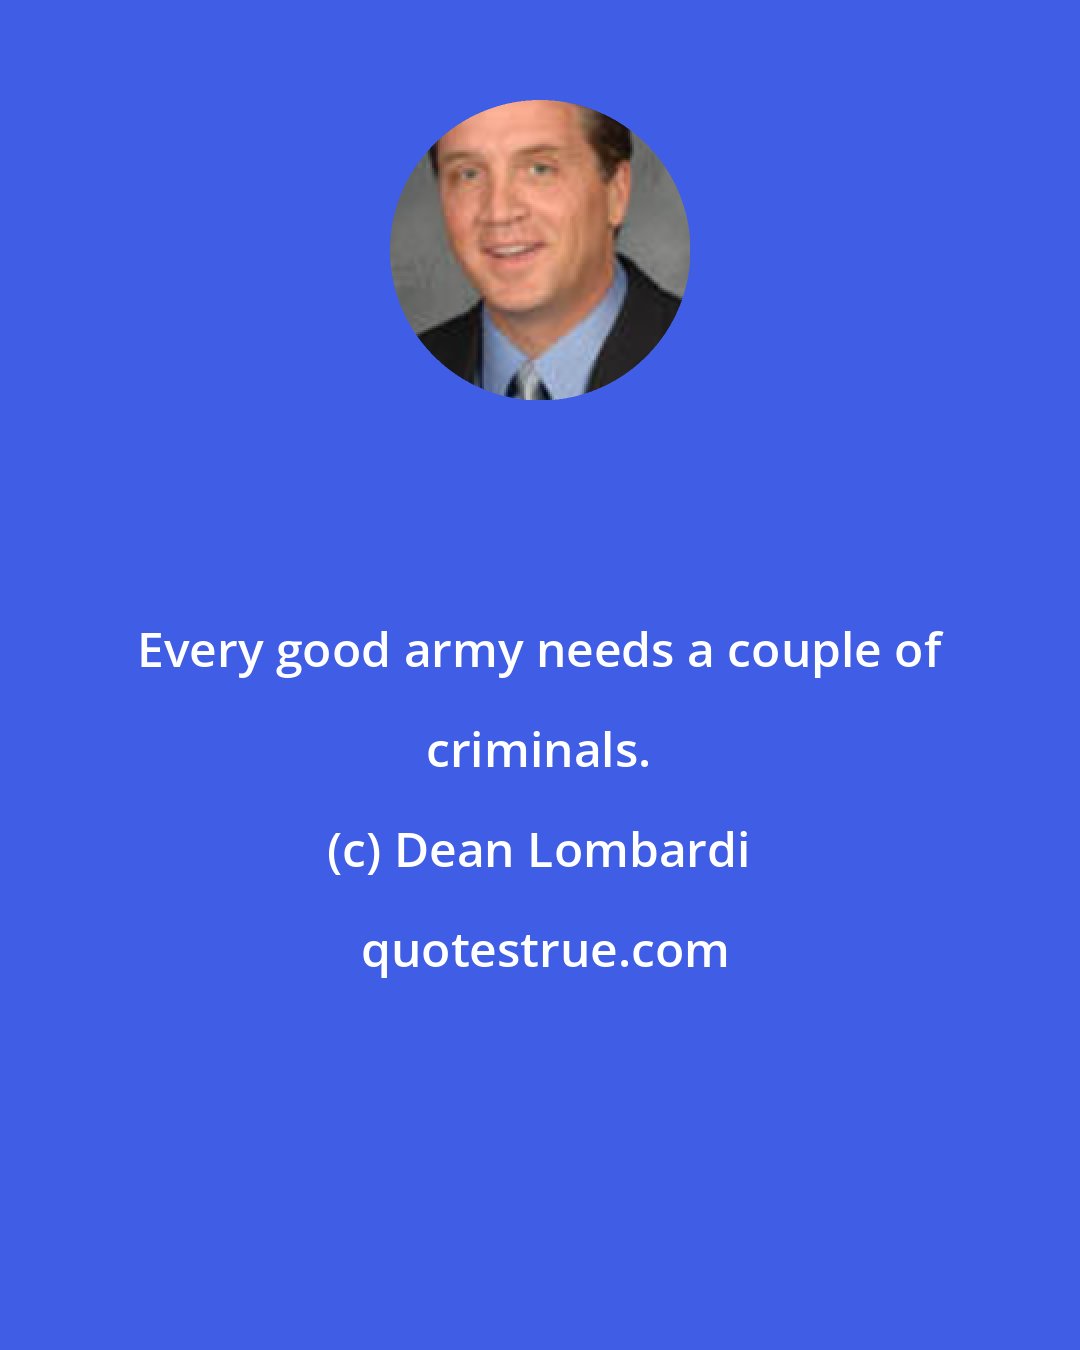 Dean Lombardi: Every good army needs a couple of criminals.